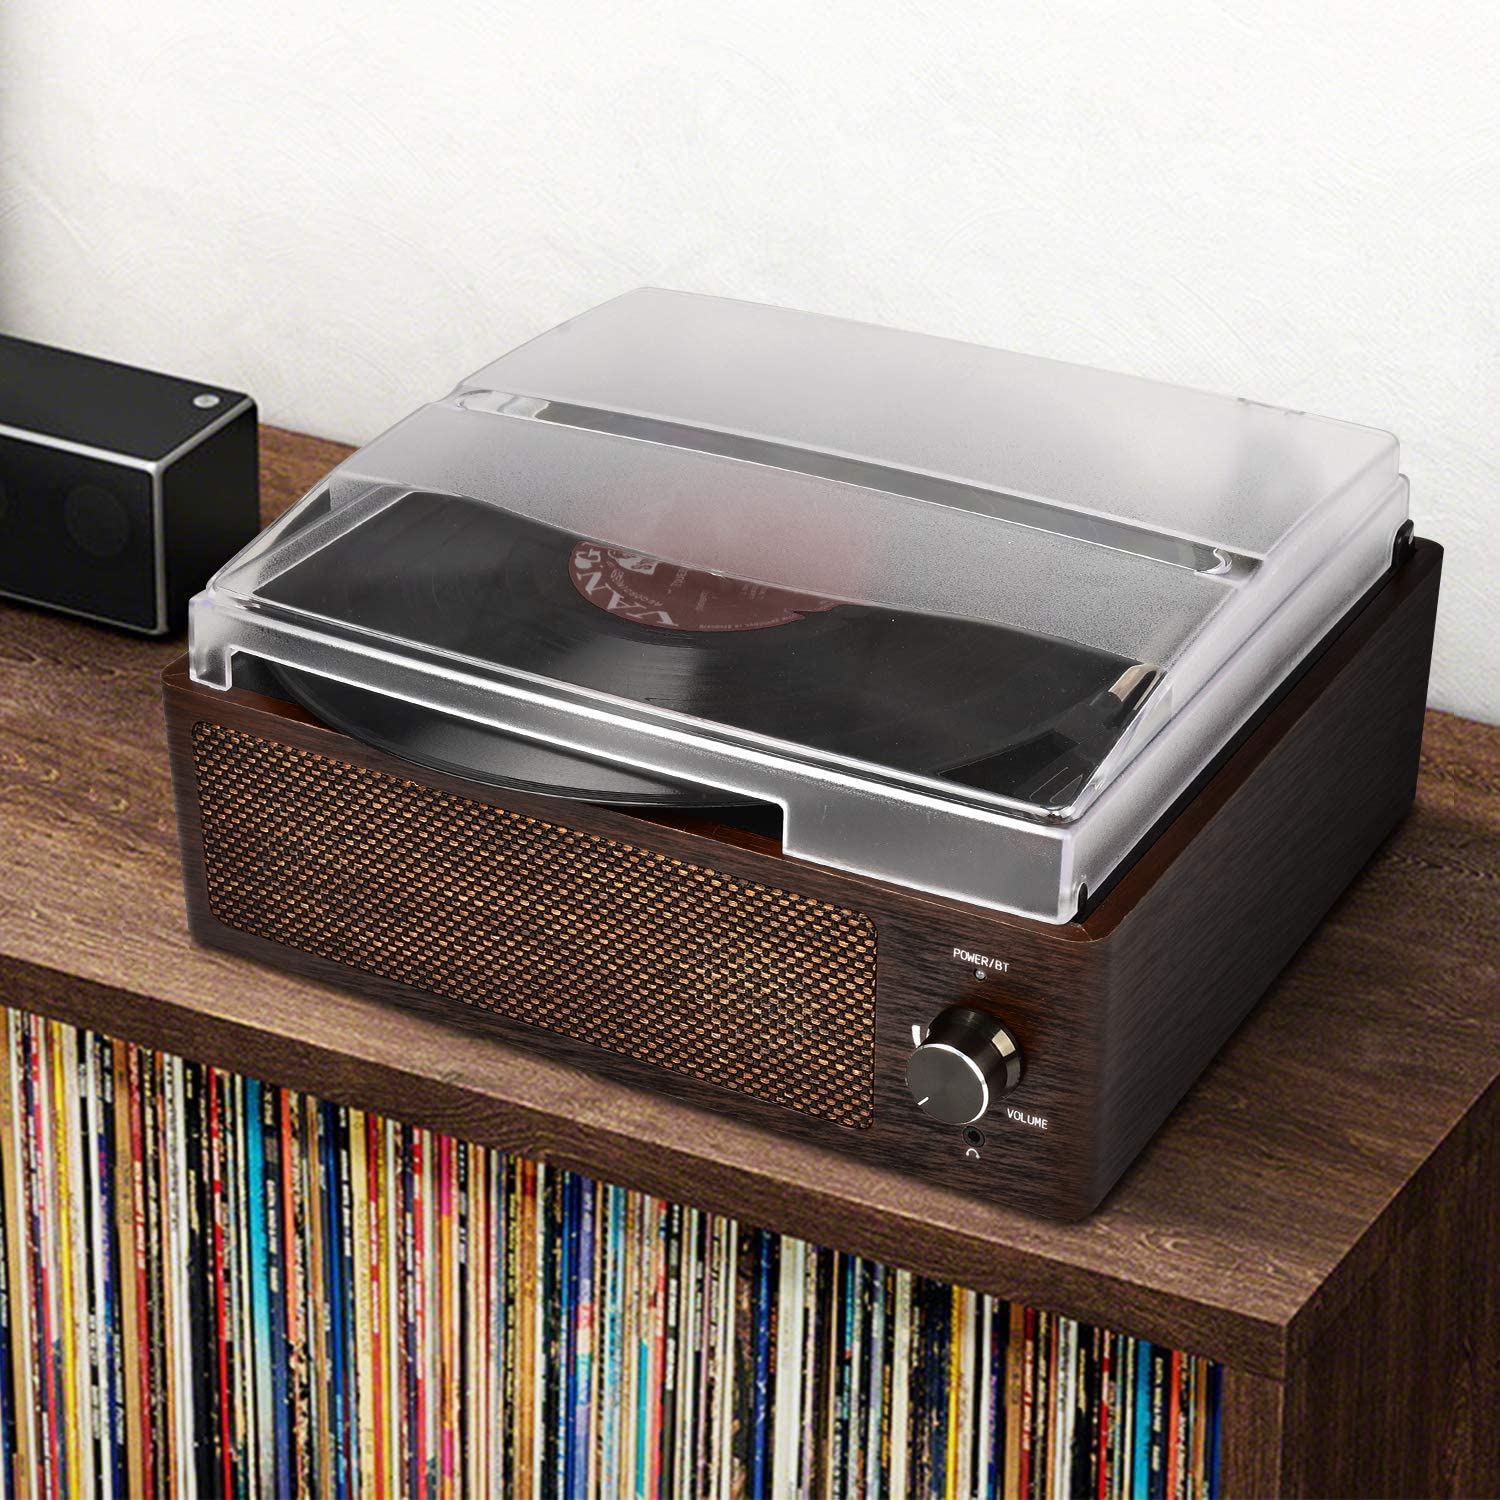 DIGITNOW Bluetooth Record Player Belt-Driven 3-Speed Turntable, Vintage Vinyl  Record Players Built-in Stereo Speakers, with Headphone Jack/ Aux Input/  RCA Line Out, Brown Wooden-Basic Function-DIGITNOW!